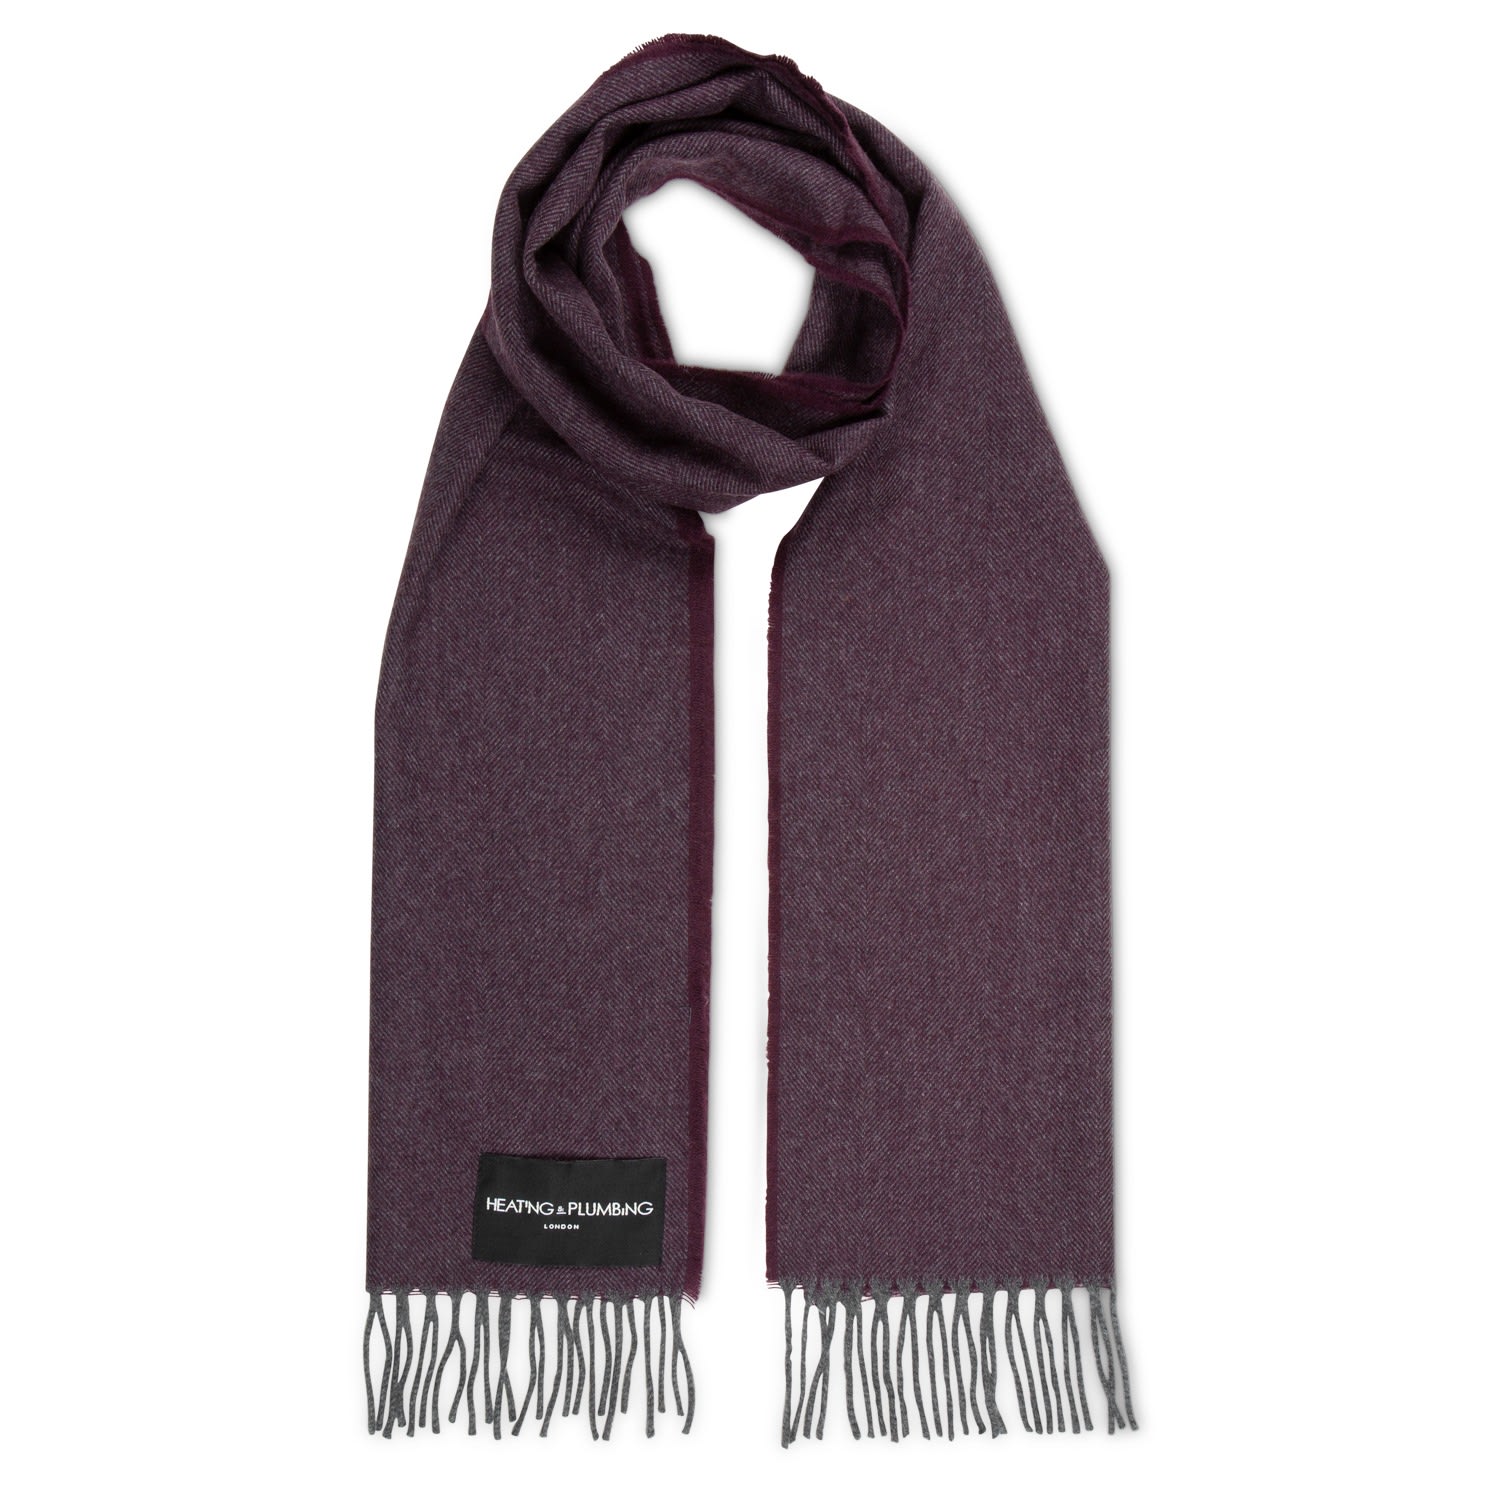 Heating & Plumbing London Men's Red The Eternal Edition - 100% Cashmere Scarf - Burgundy